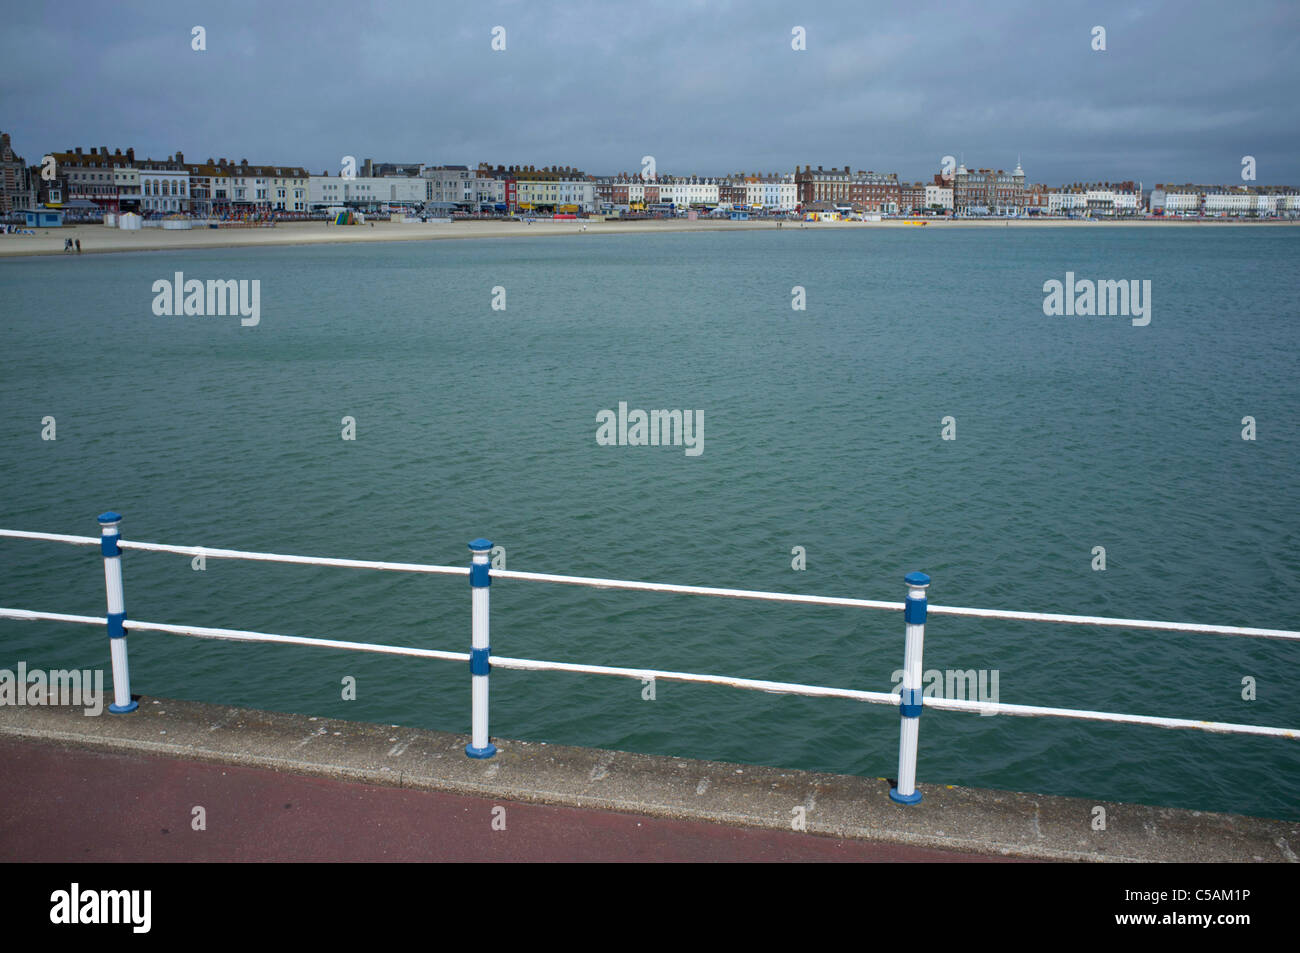 The seafront and beach in Weymouth, Dorset, UK. Stock Photo